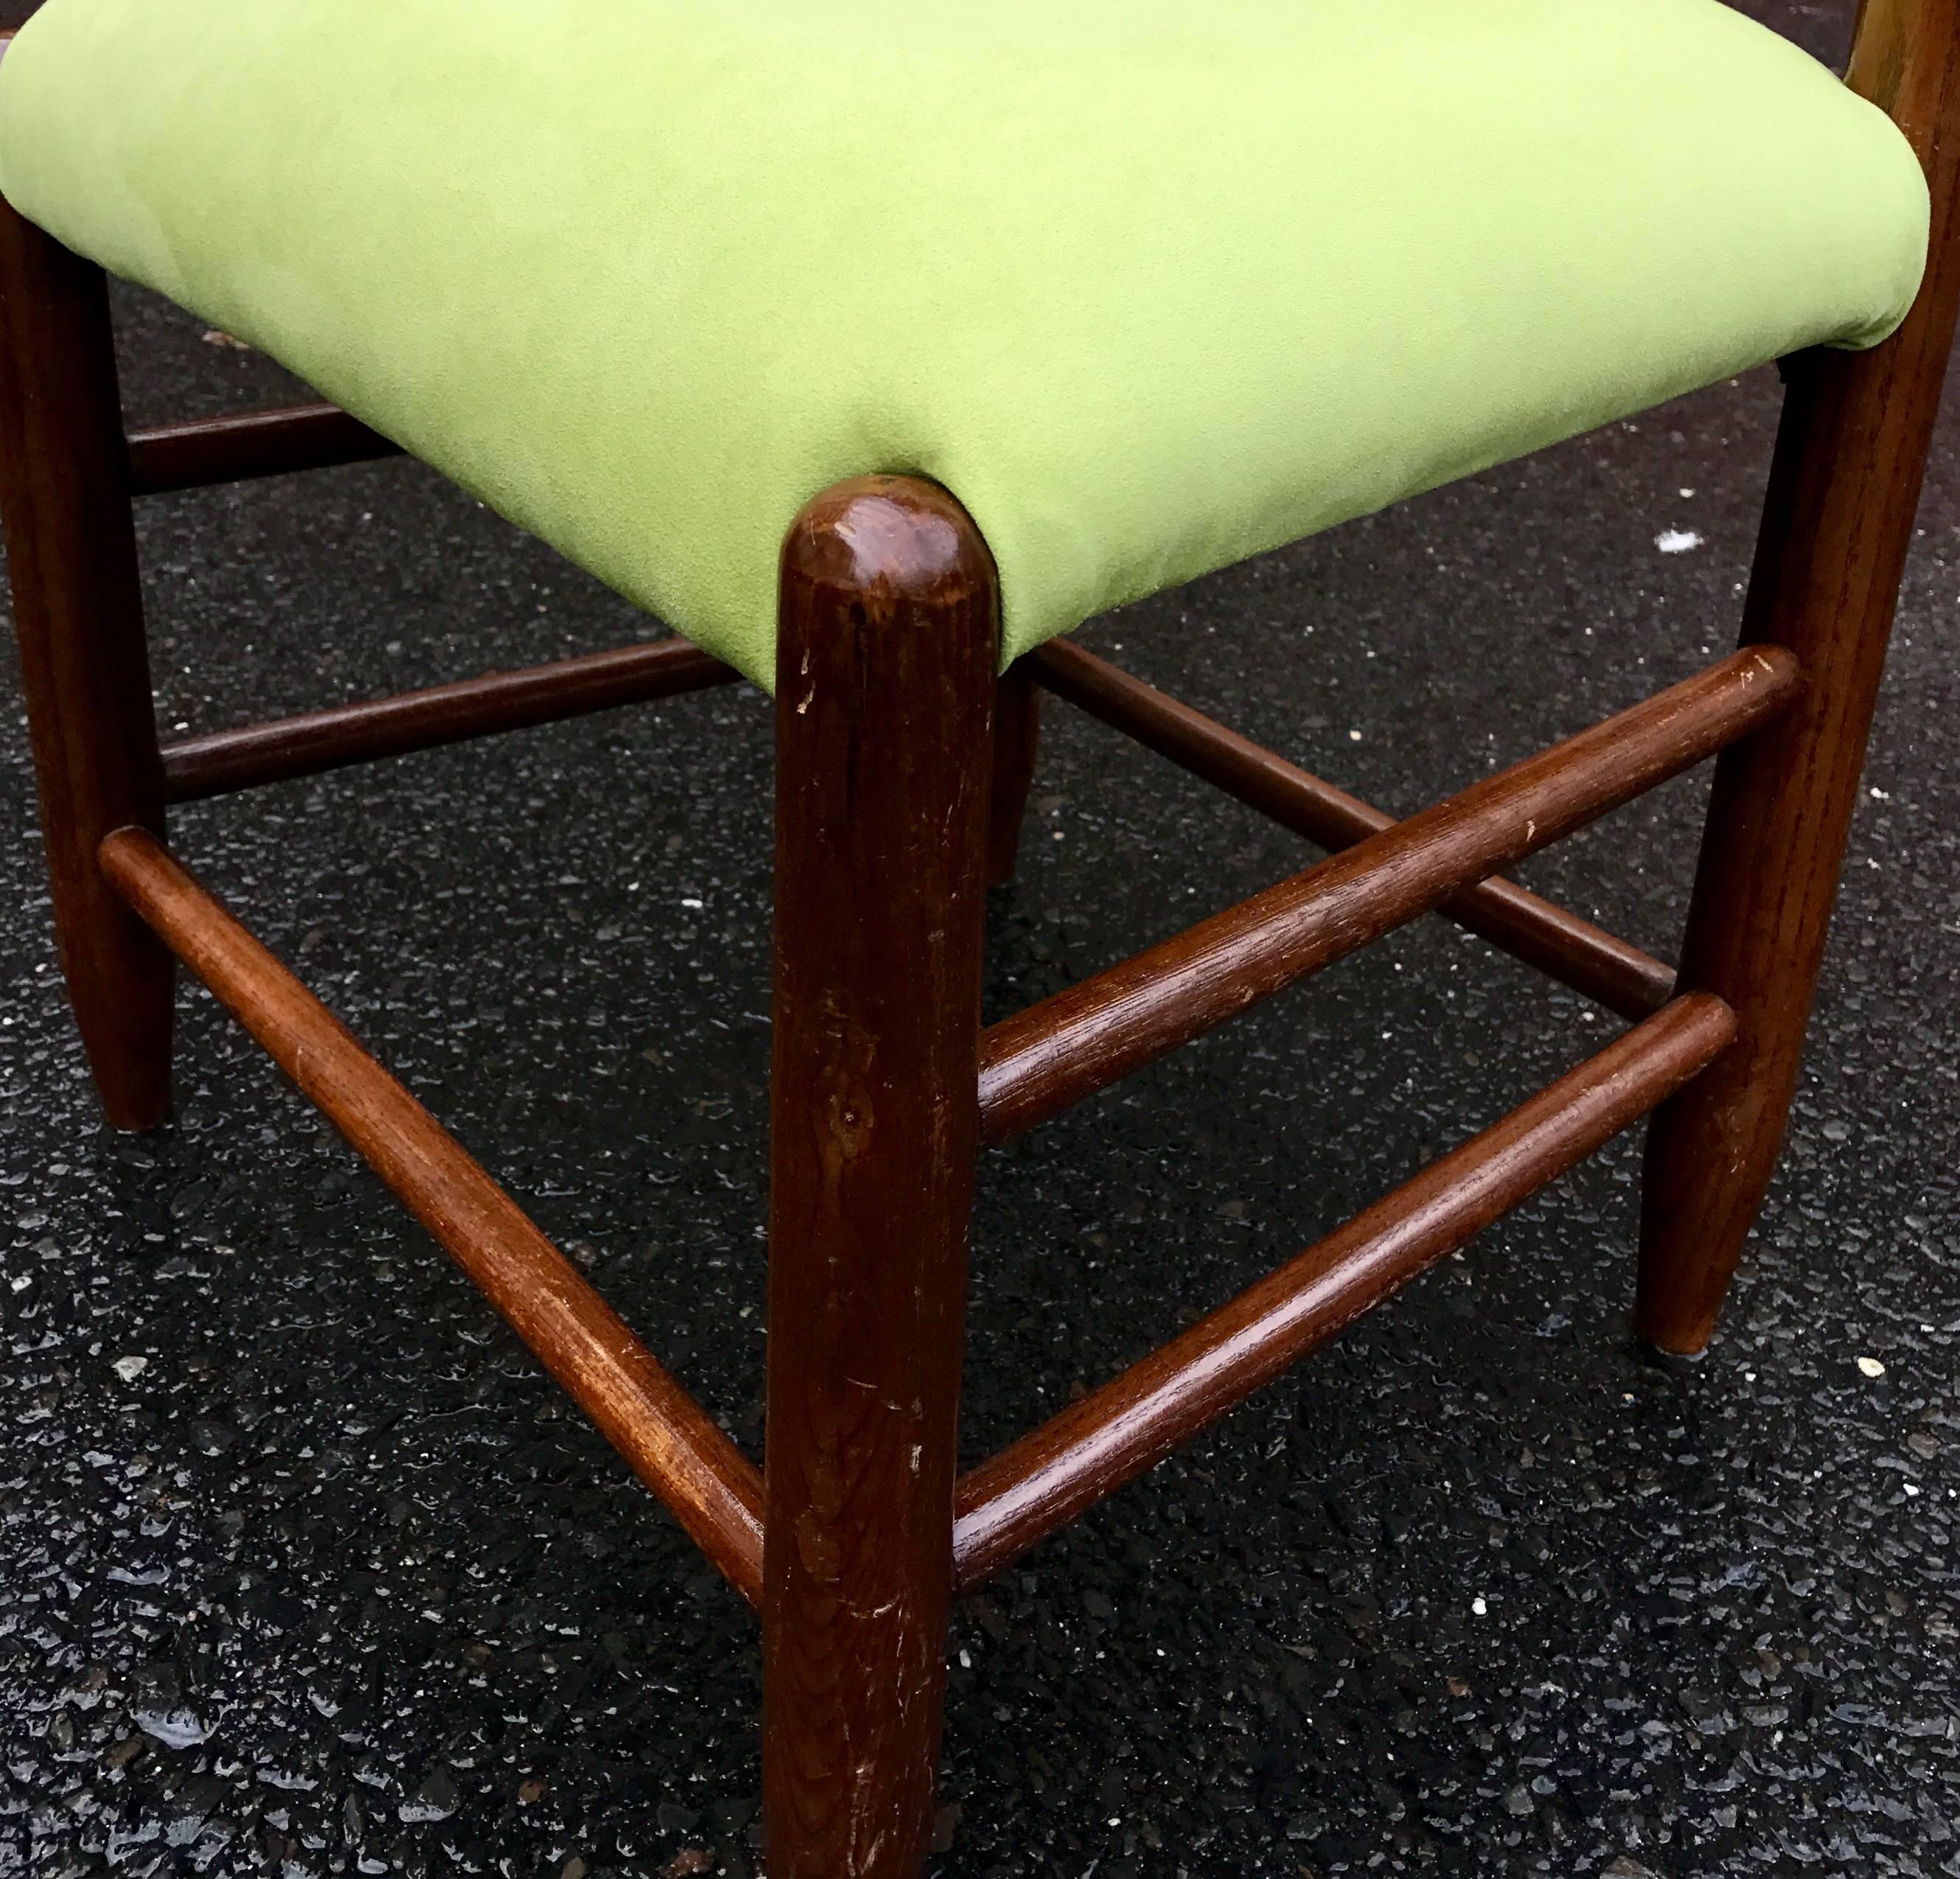 20th Century Mid-Century Modern Italian Wooden Valet Chair With Green Faux Suede Fabric For Sale